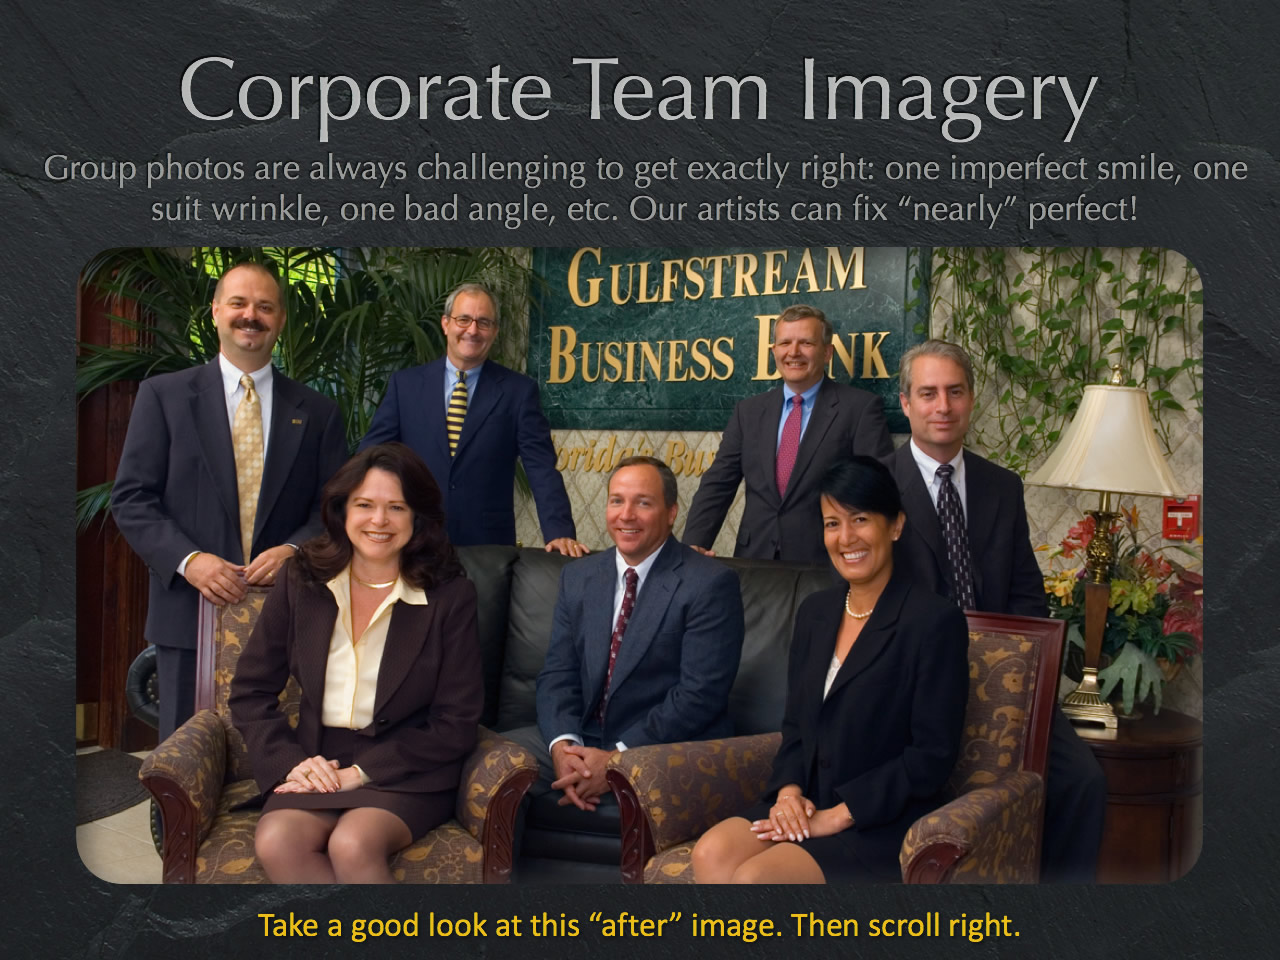 Corporate team images almost always have at least a few flaws that can be corrected